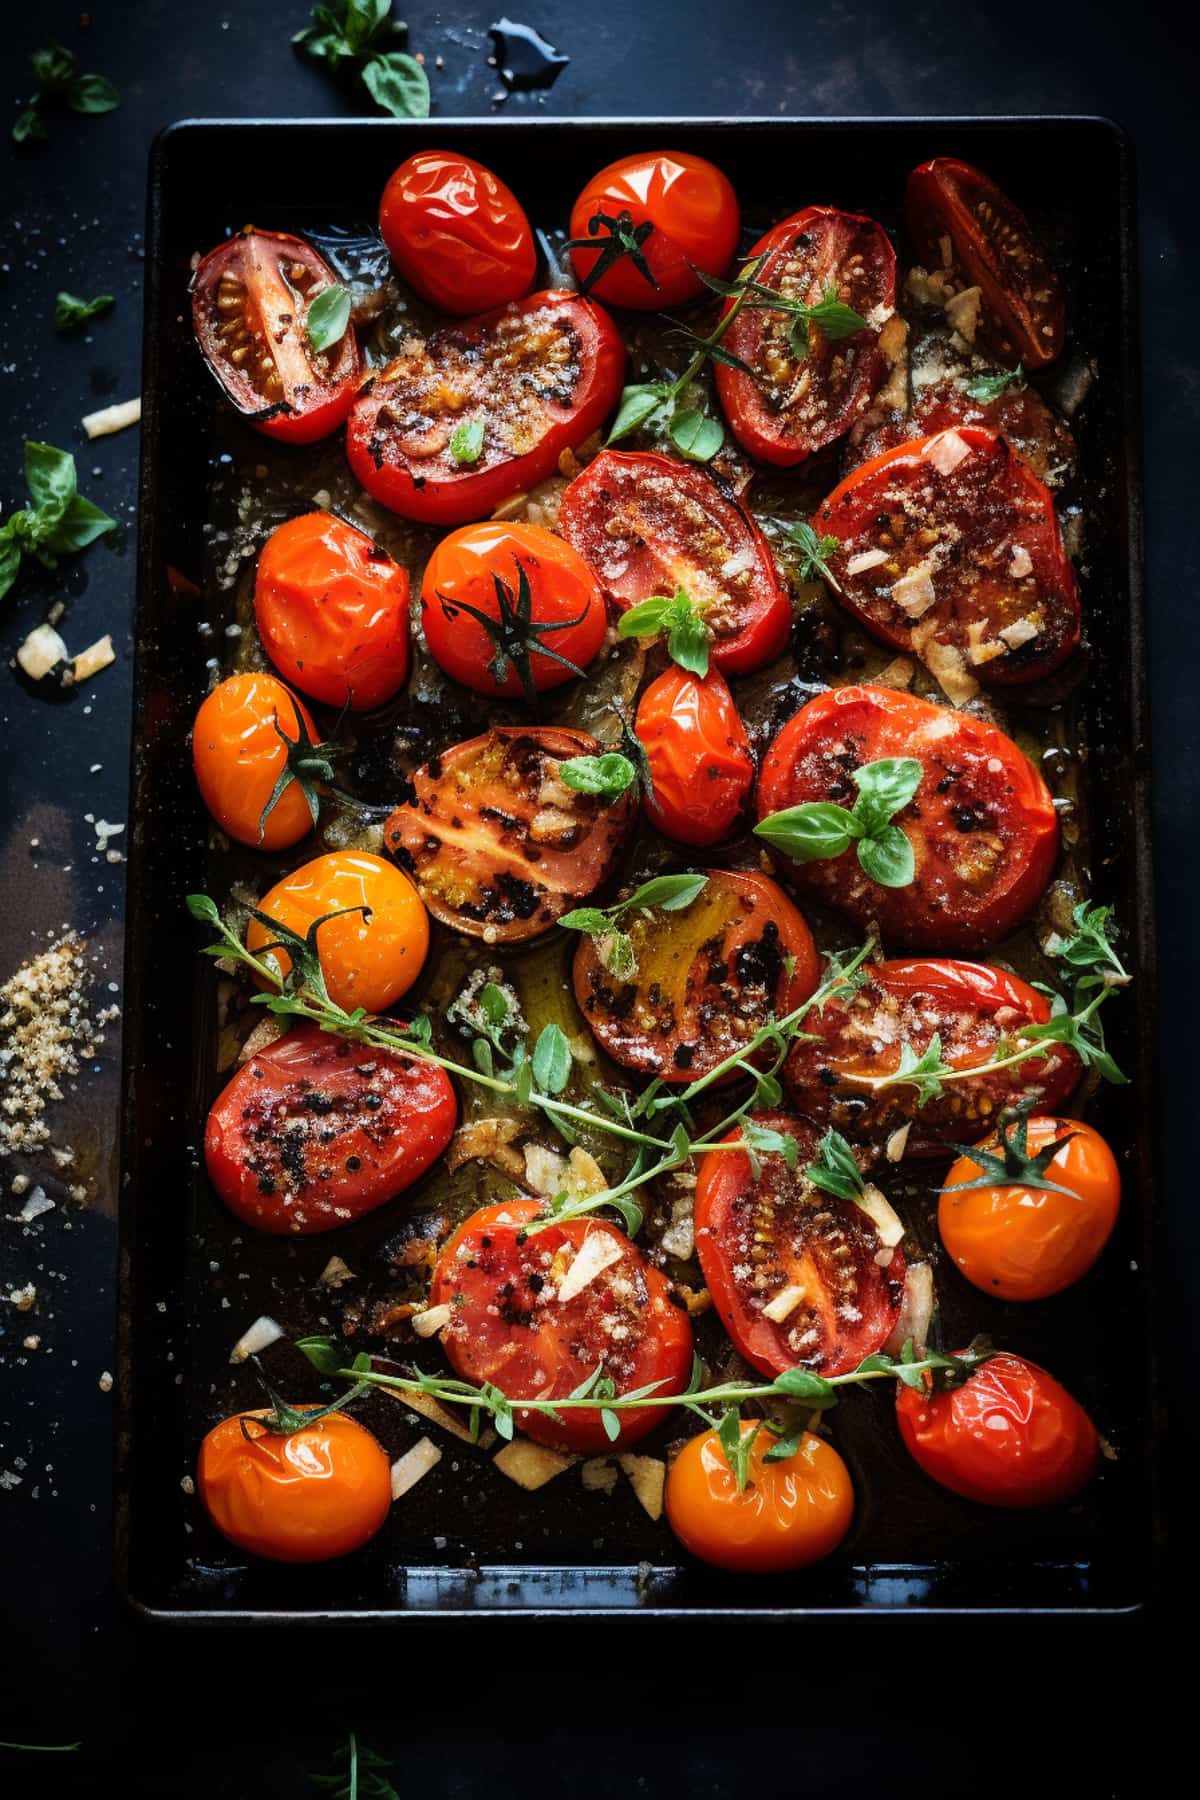 Roasted tomatoes on a baking tray.